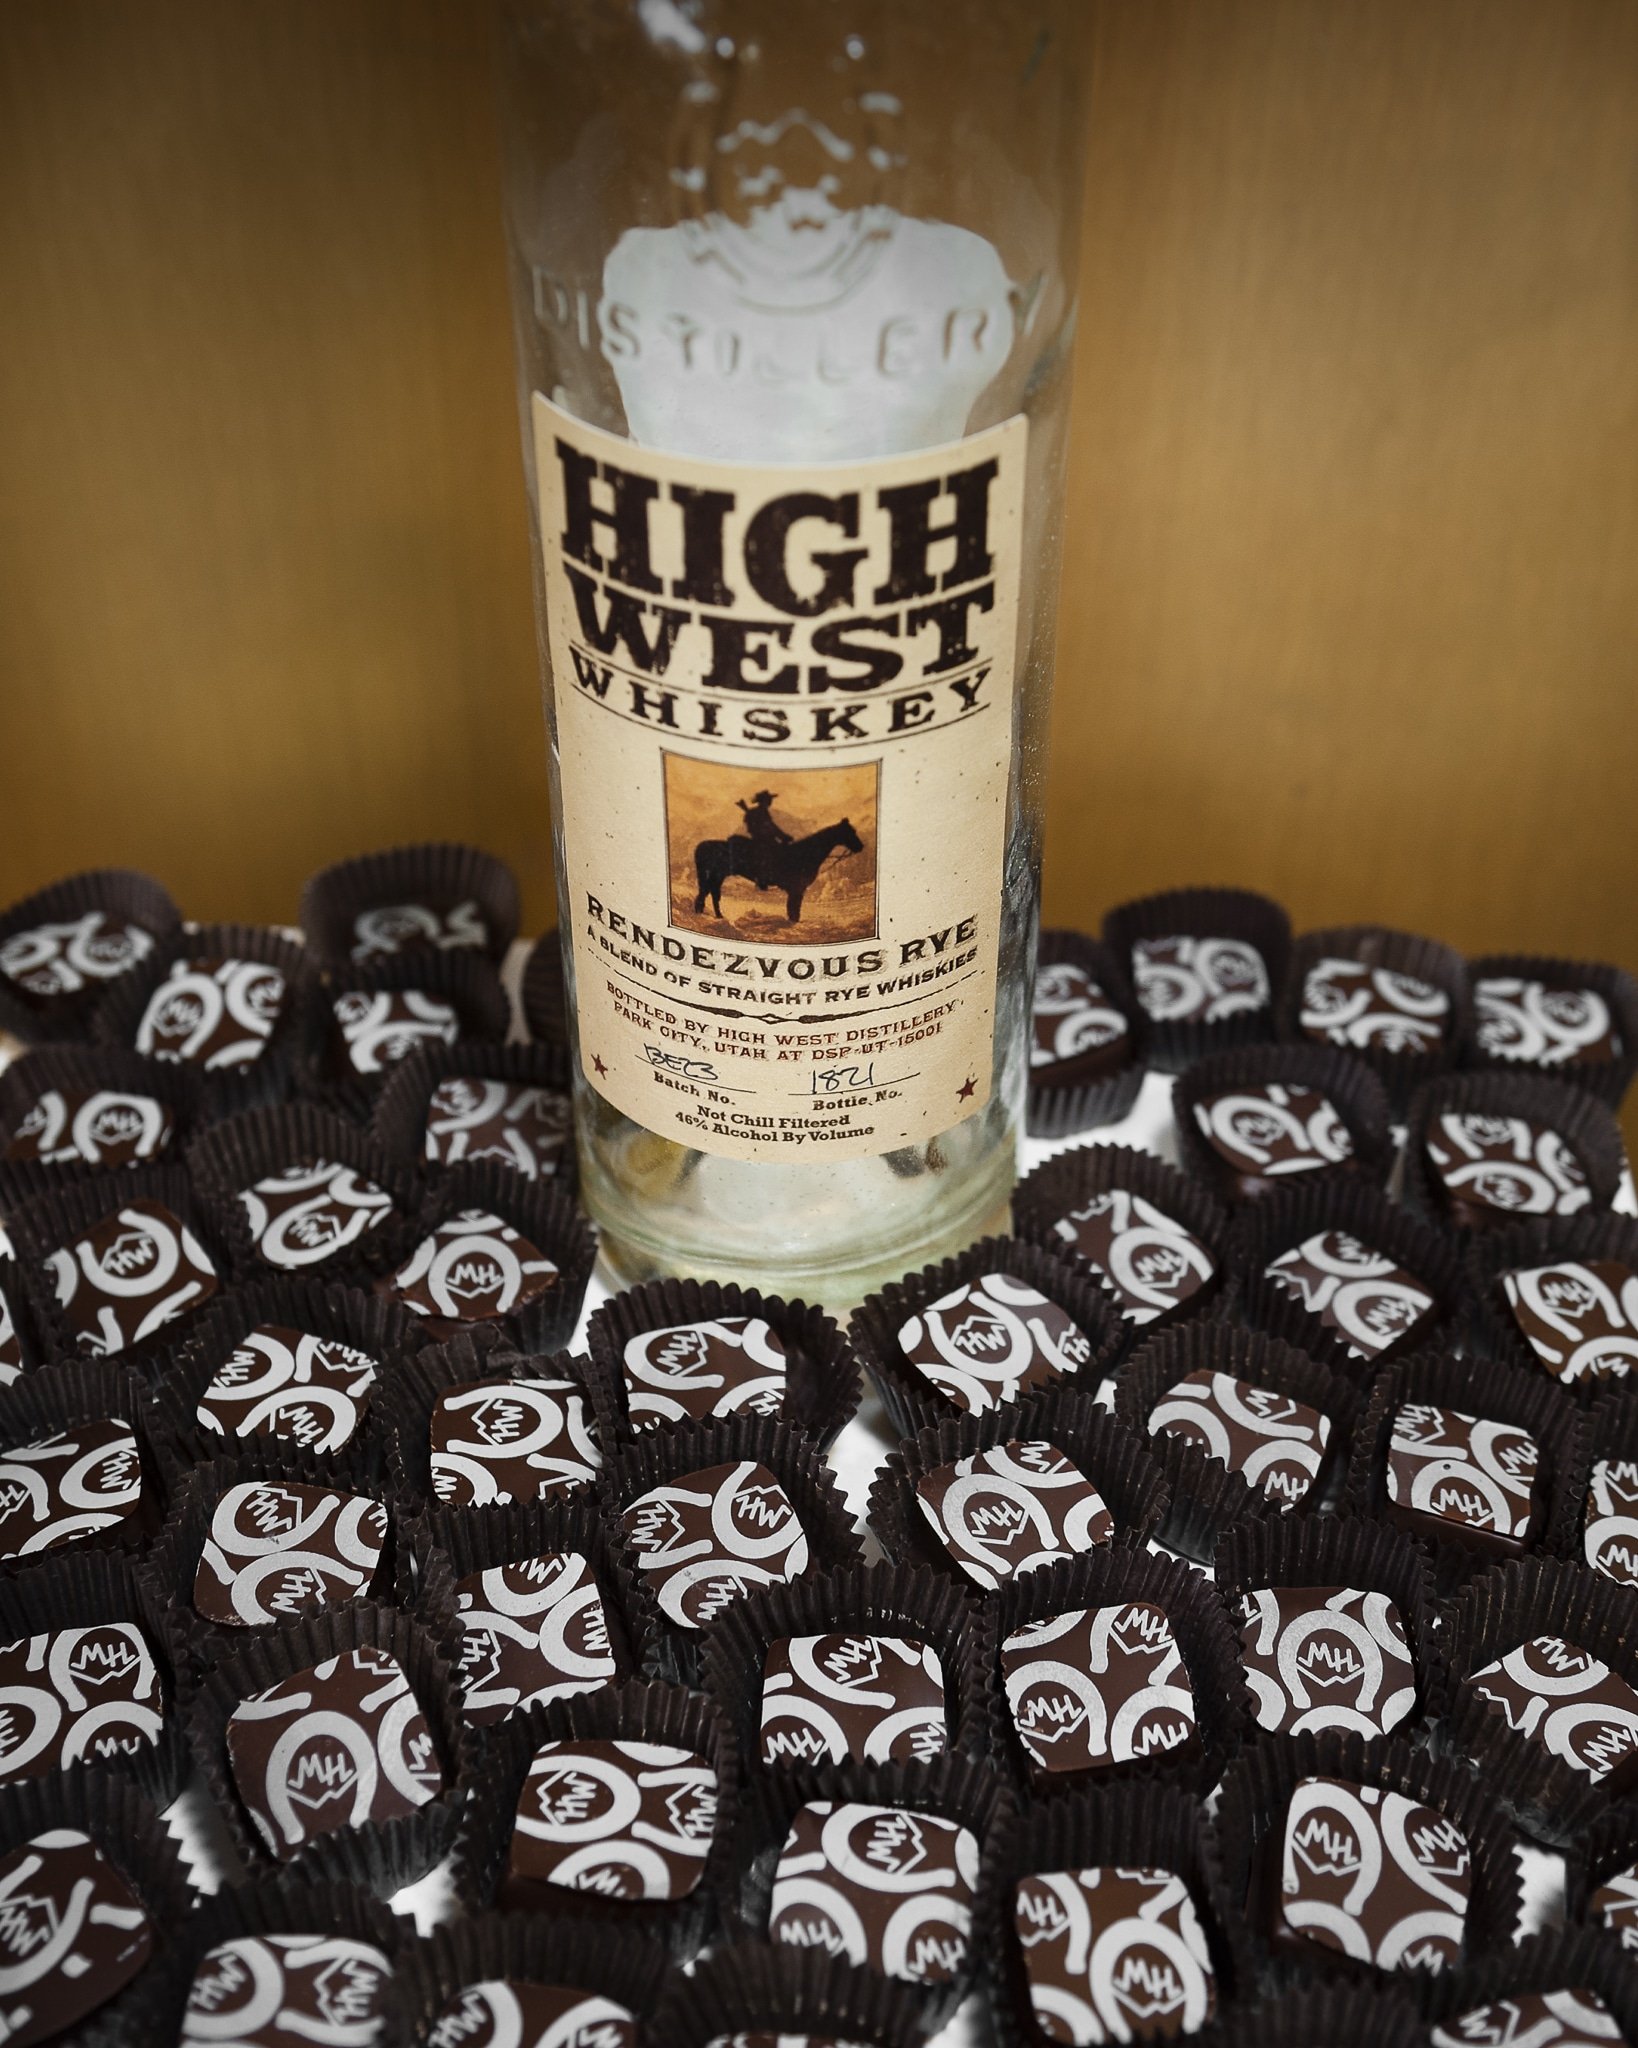 A bottle of High West Whiskey is surrounded by chocolates with the company's logo inscribed on top.